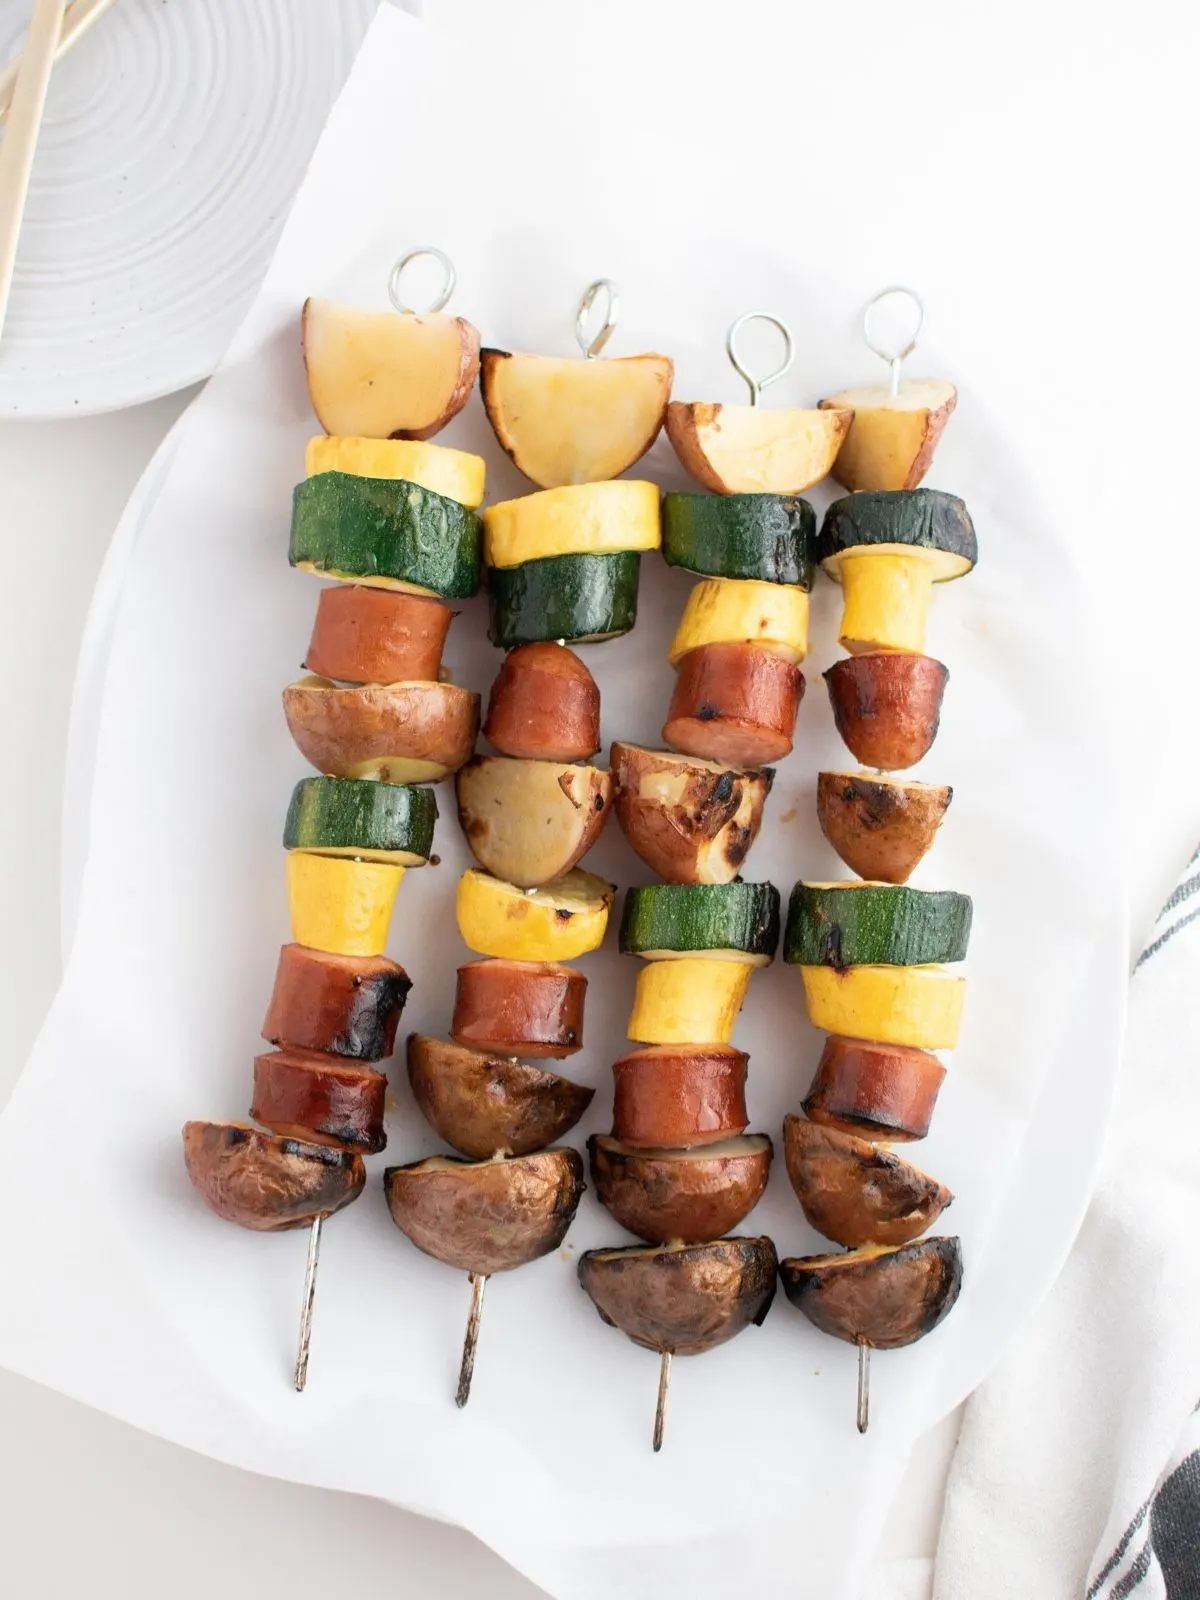 Grilled sausage kabobs with yellow squash, zucchini, and potatoes on a white plate.